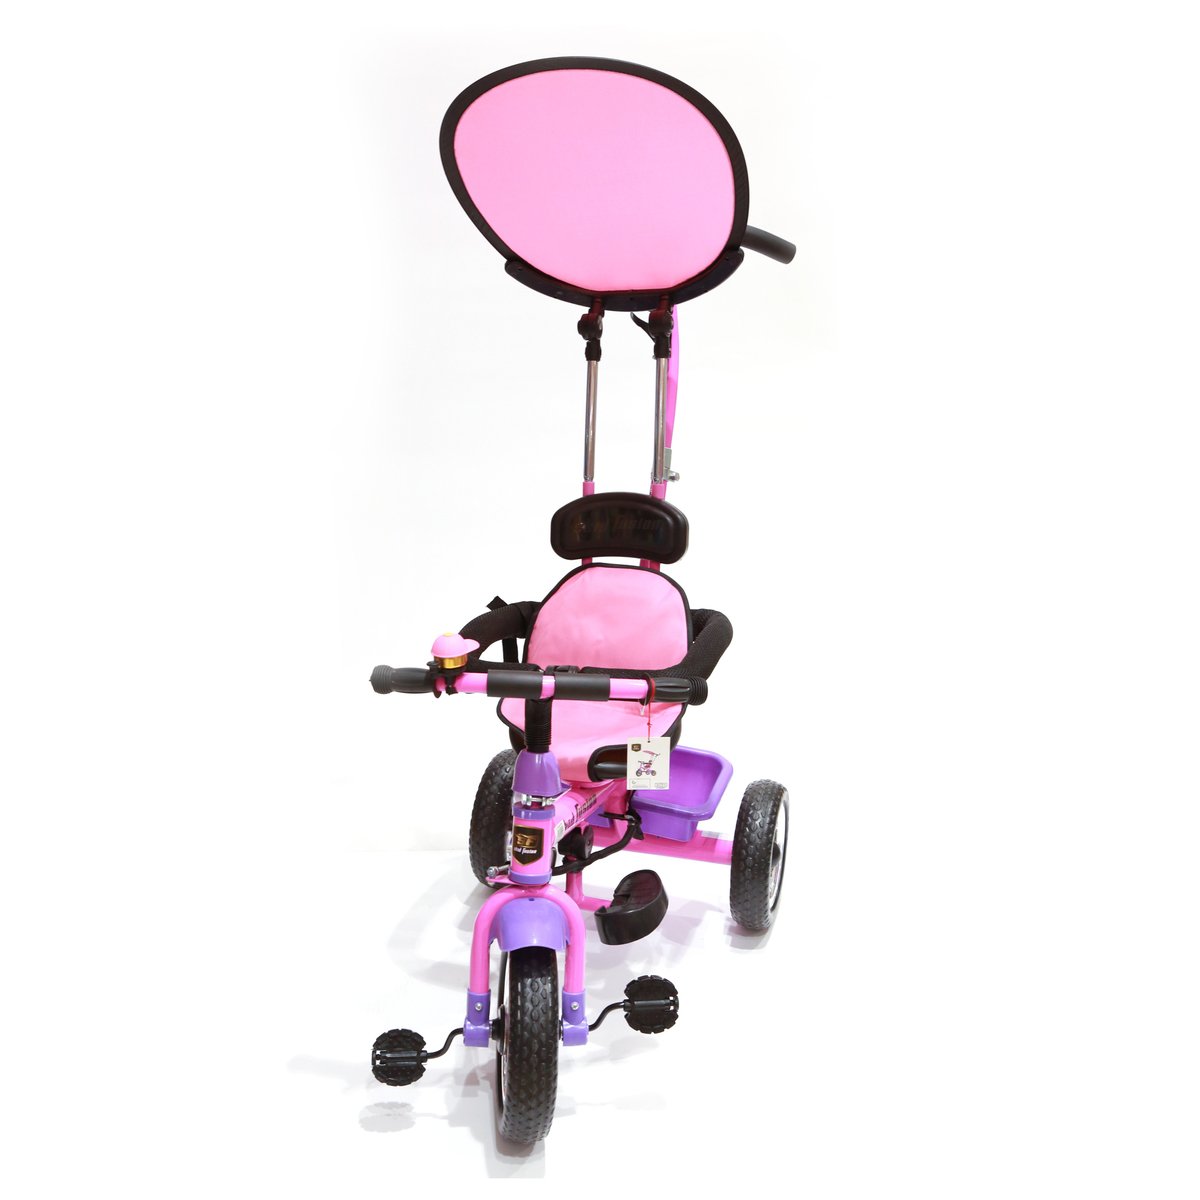 Skid Fusion Tricycle BW-101 Assorted Colors